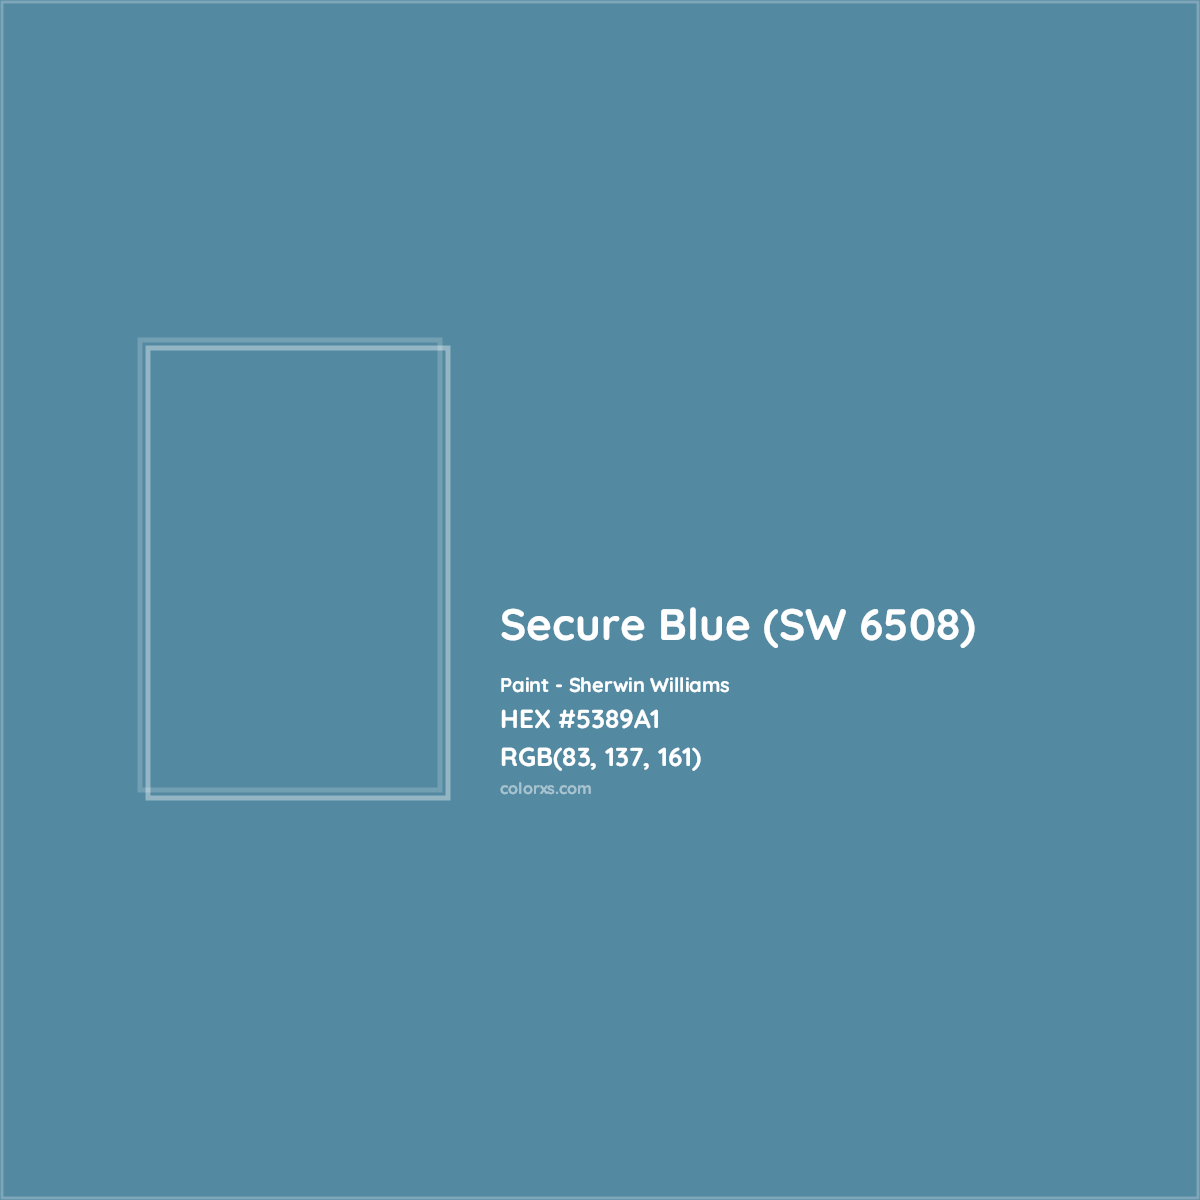 HEX #5389A1 Secure Blue (SW 6508) Paint Sherwin Williams - Color Code